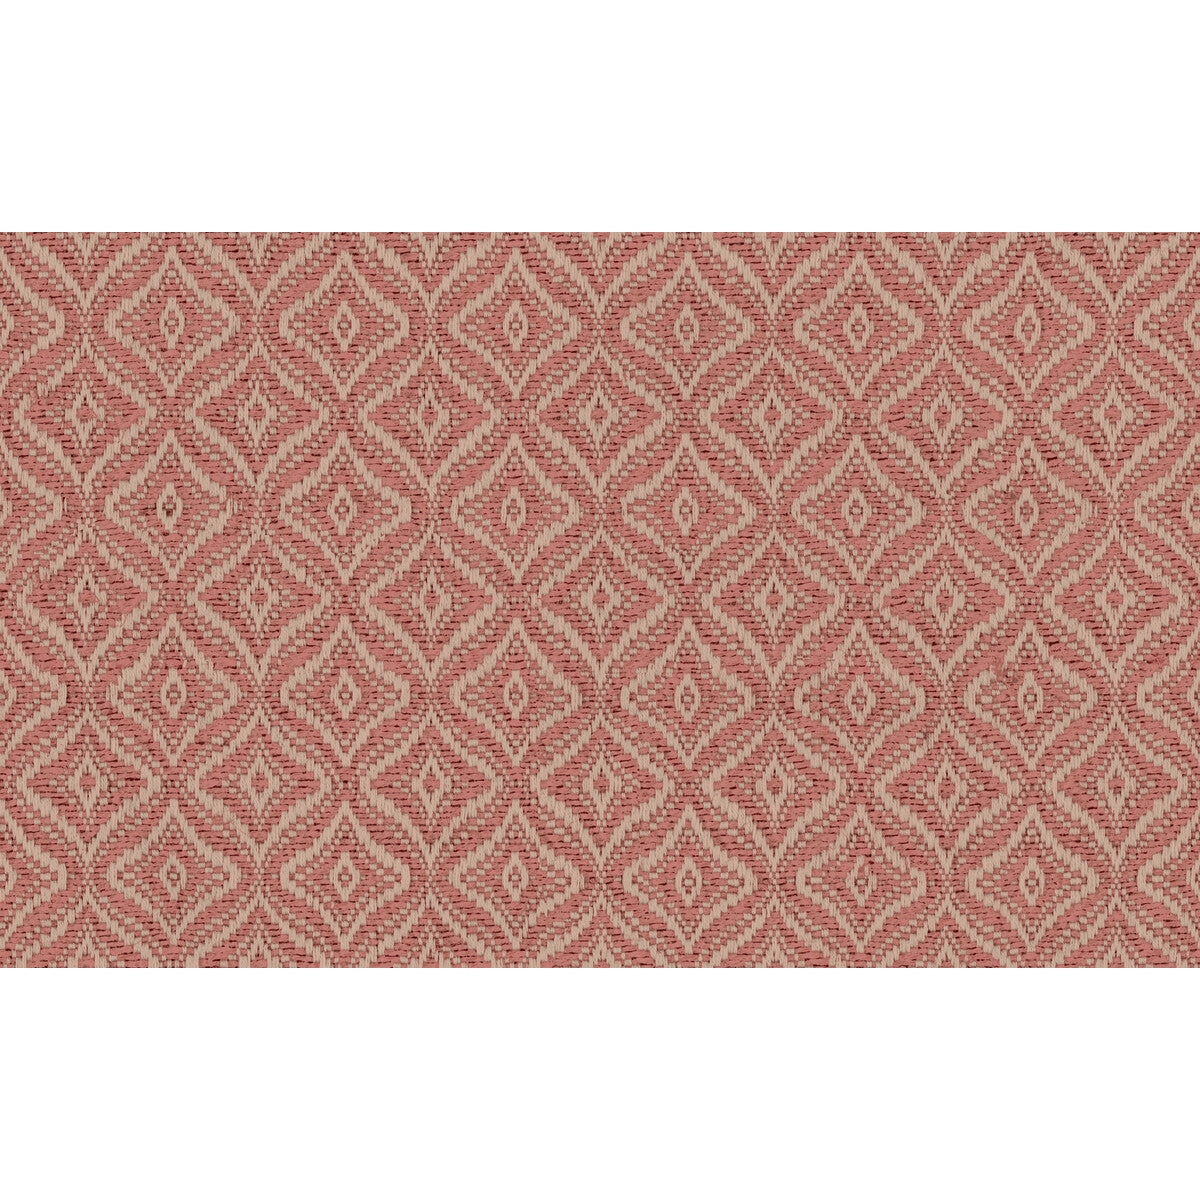 Embrun Woven fabric in coral color - pattern 8017102.12.0 - by Brunschwig &amp; Fils in the Durance collection